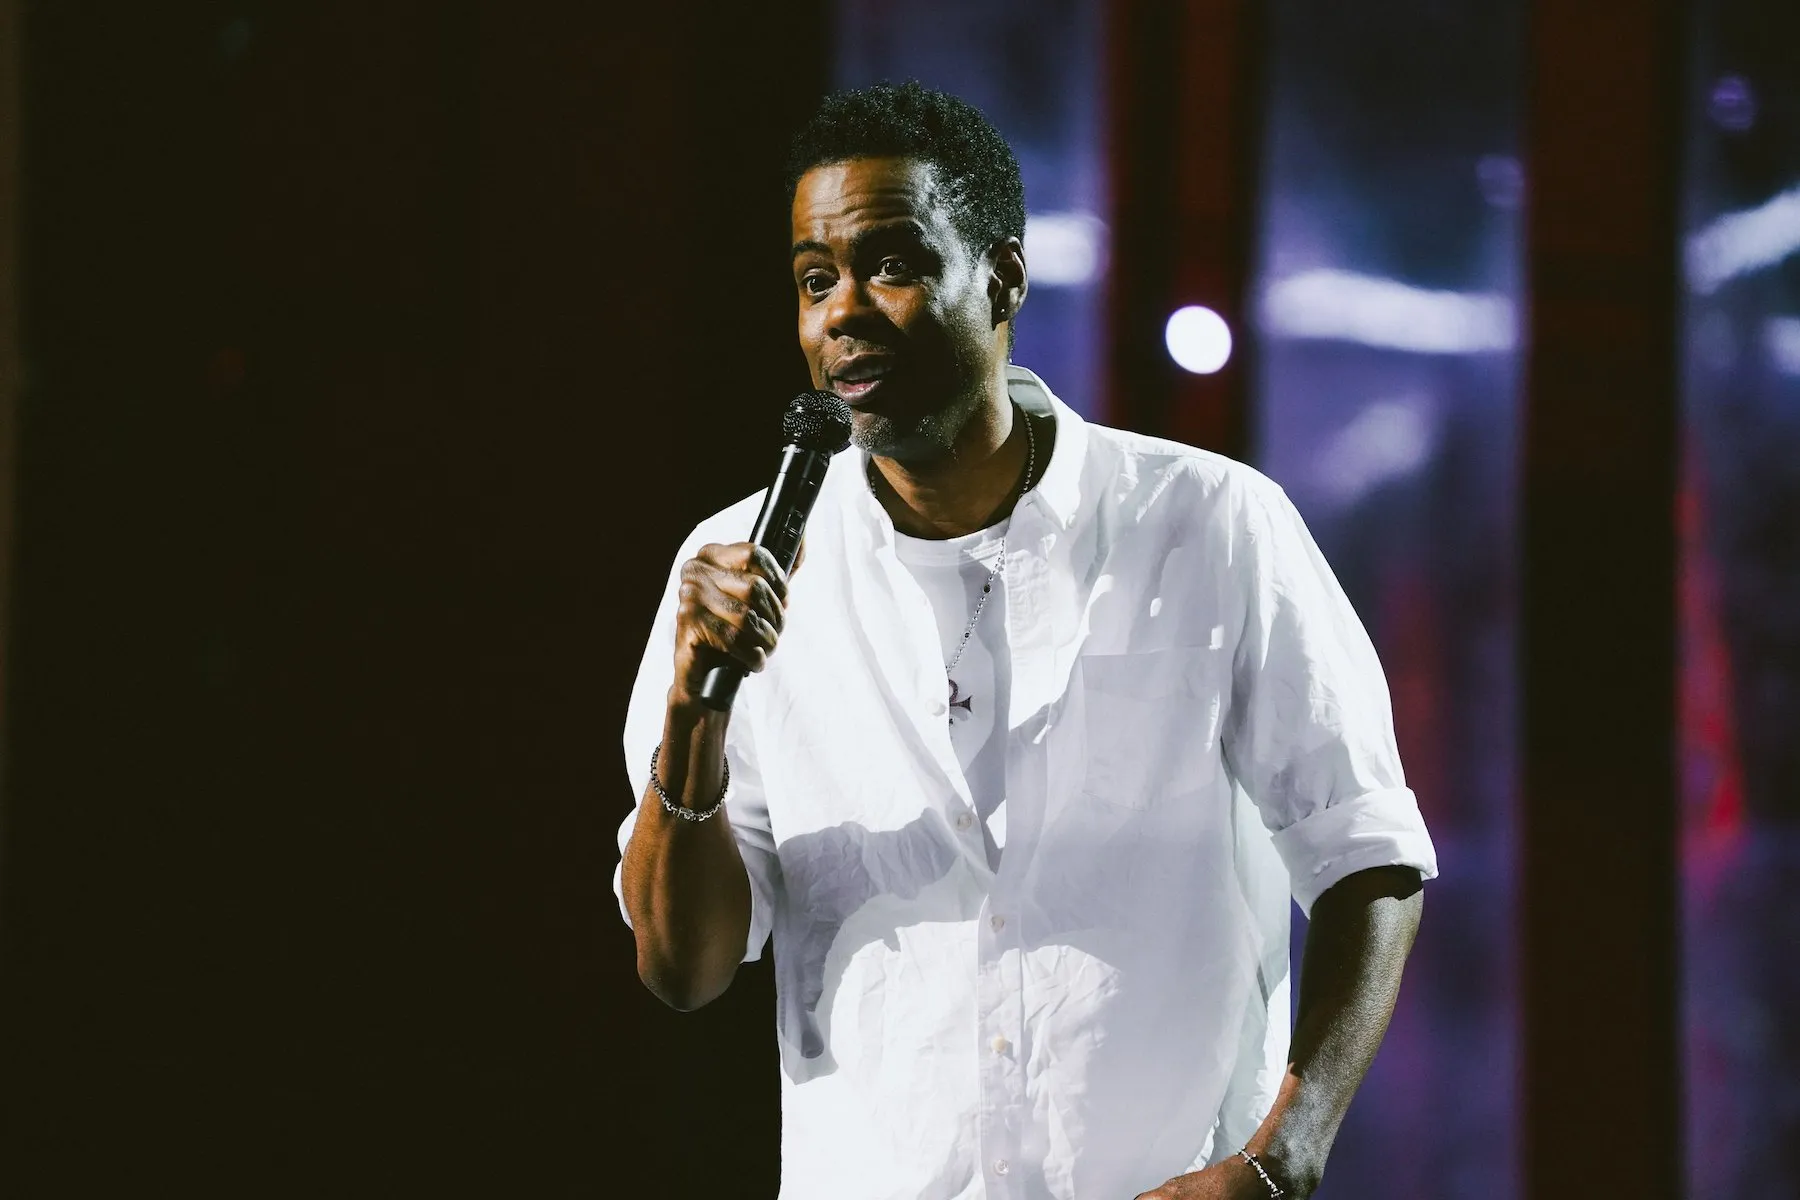 Chris Rock doing stand-up specials